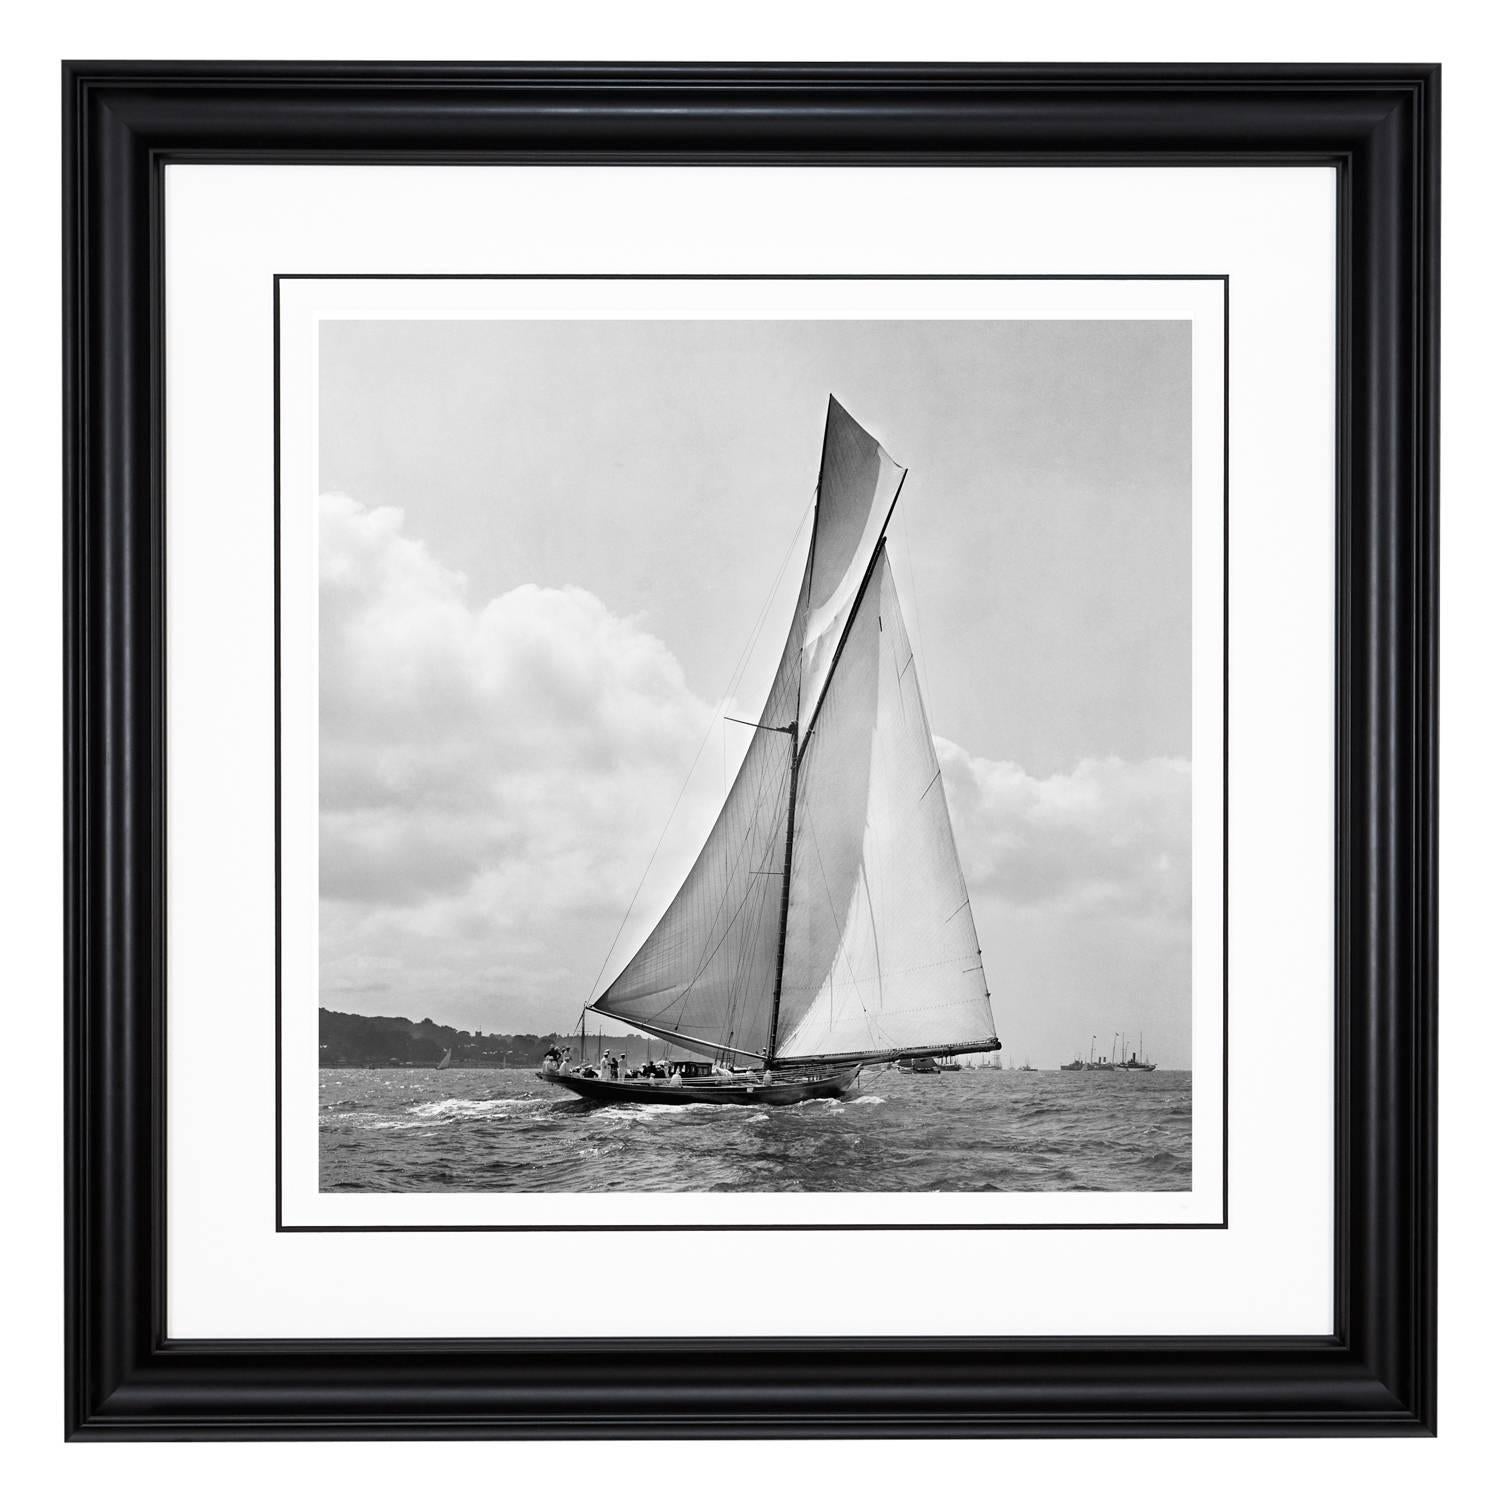 Prince of Wales Sailing Yacht Britannia, 1923 - Edition 2 of 25 - Photograph by Frank Beken